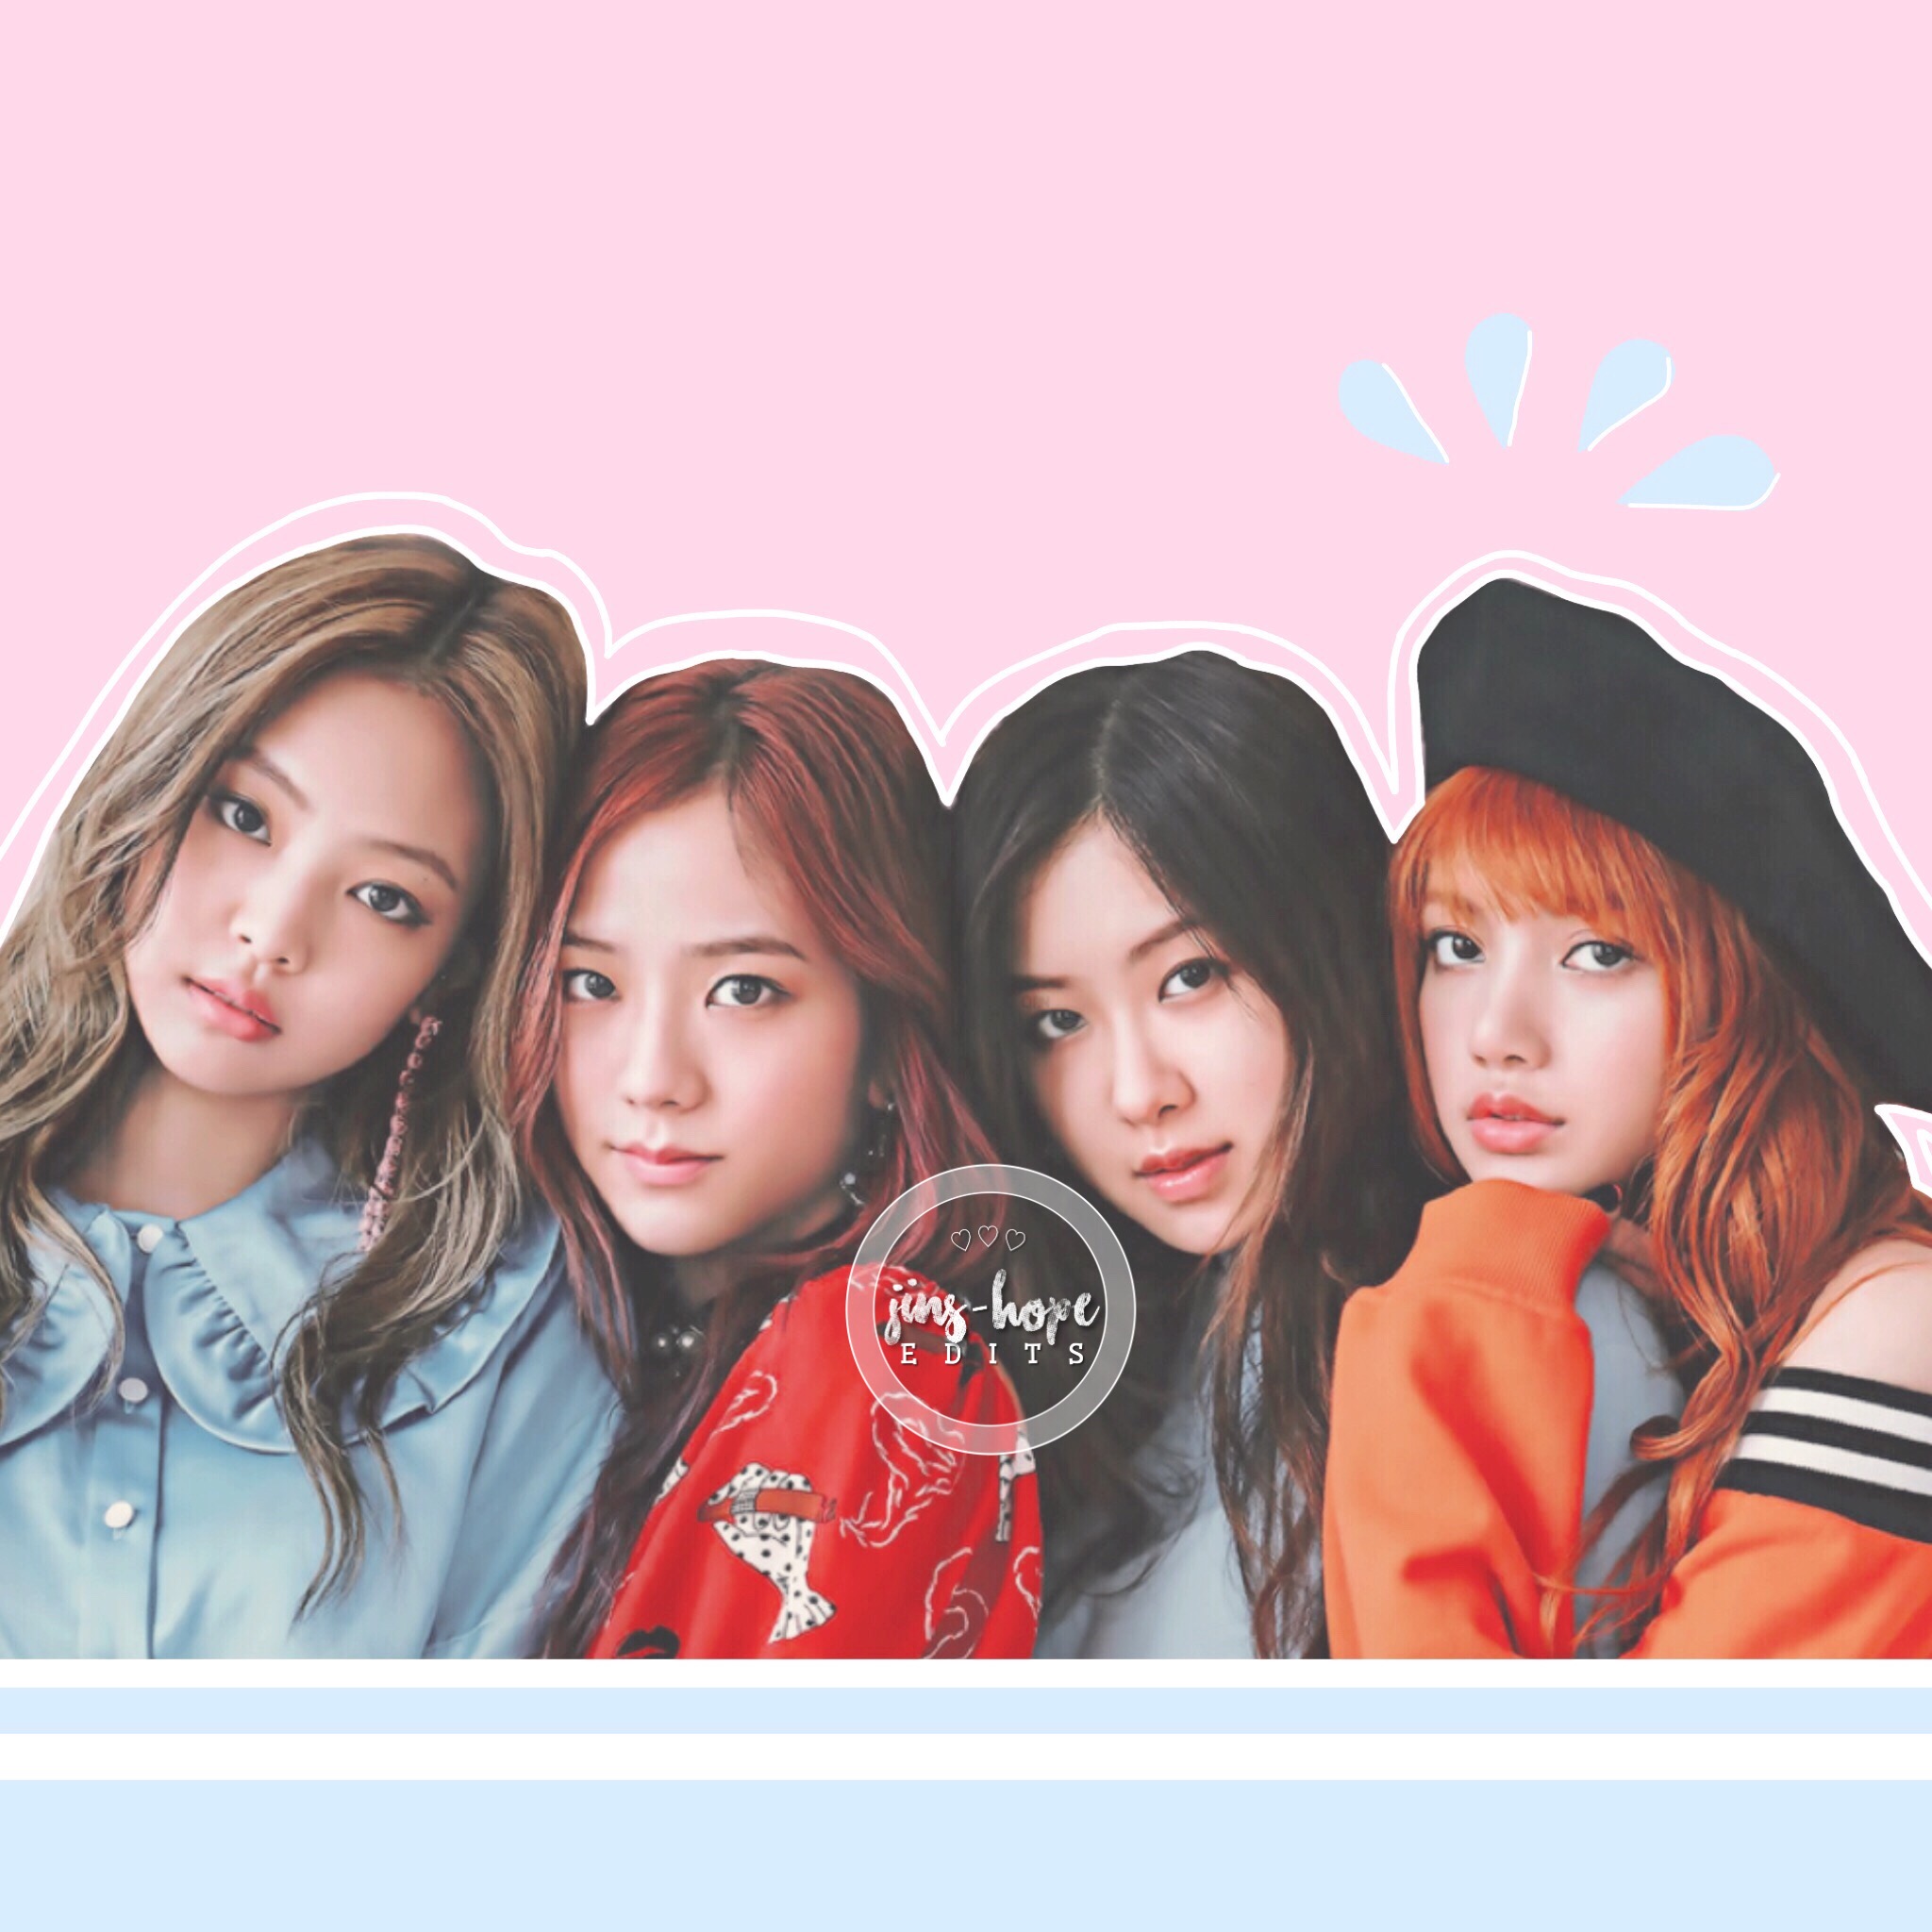  blackpink  edit  for pauleenelopez requests are closed 